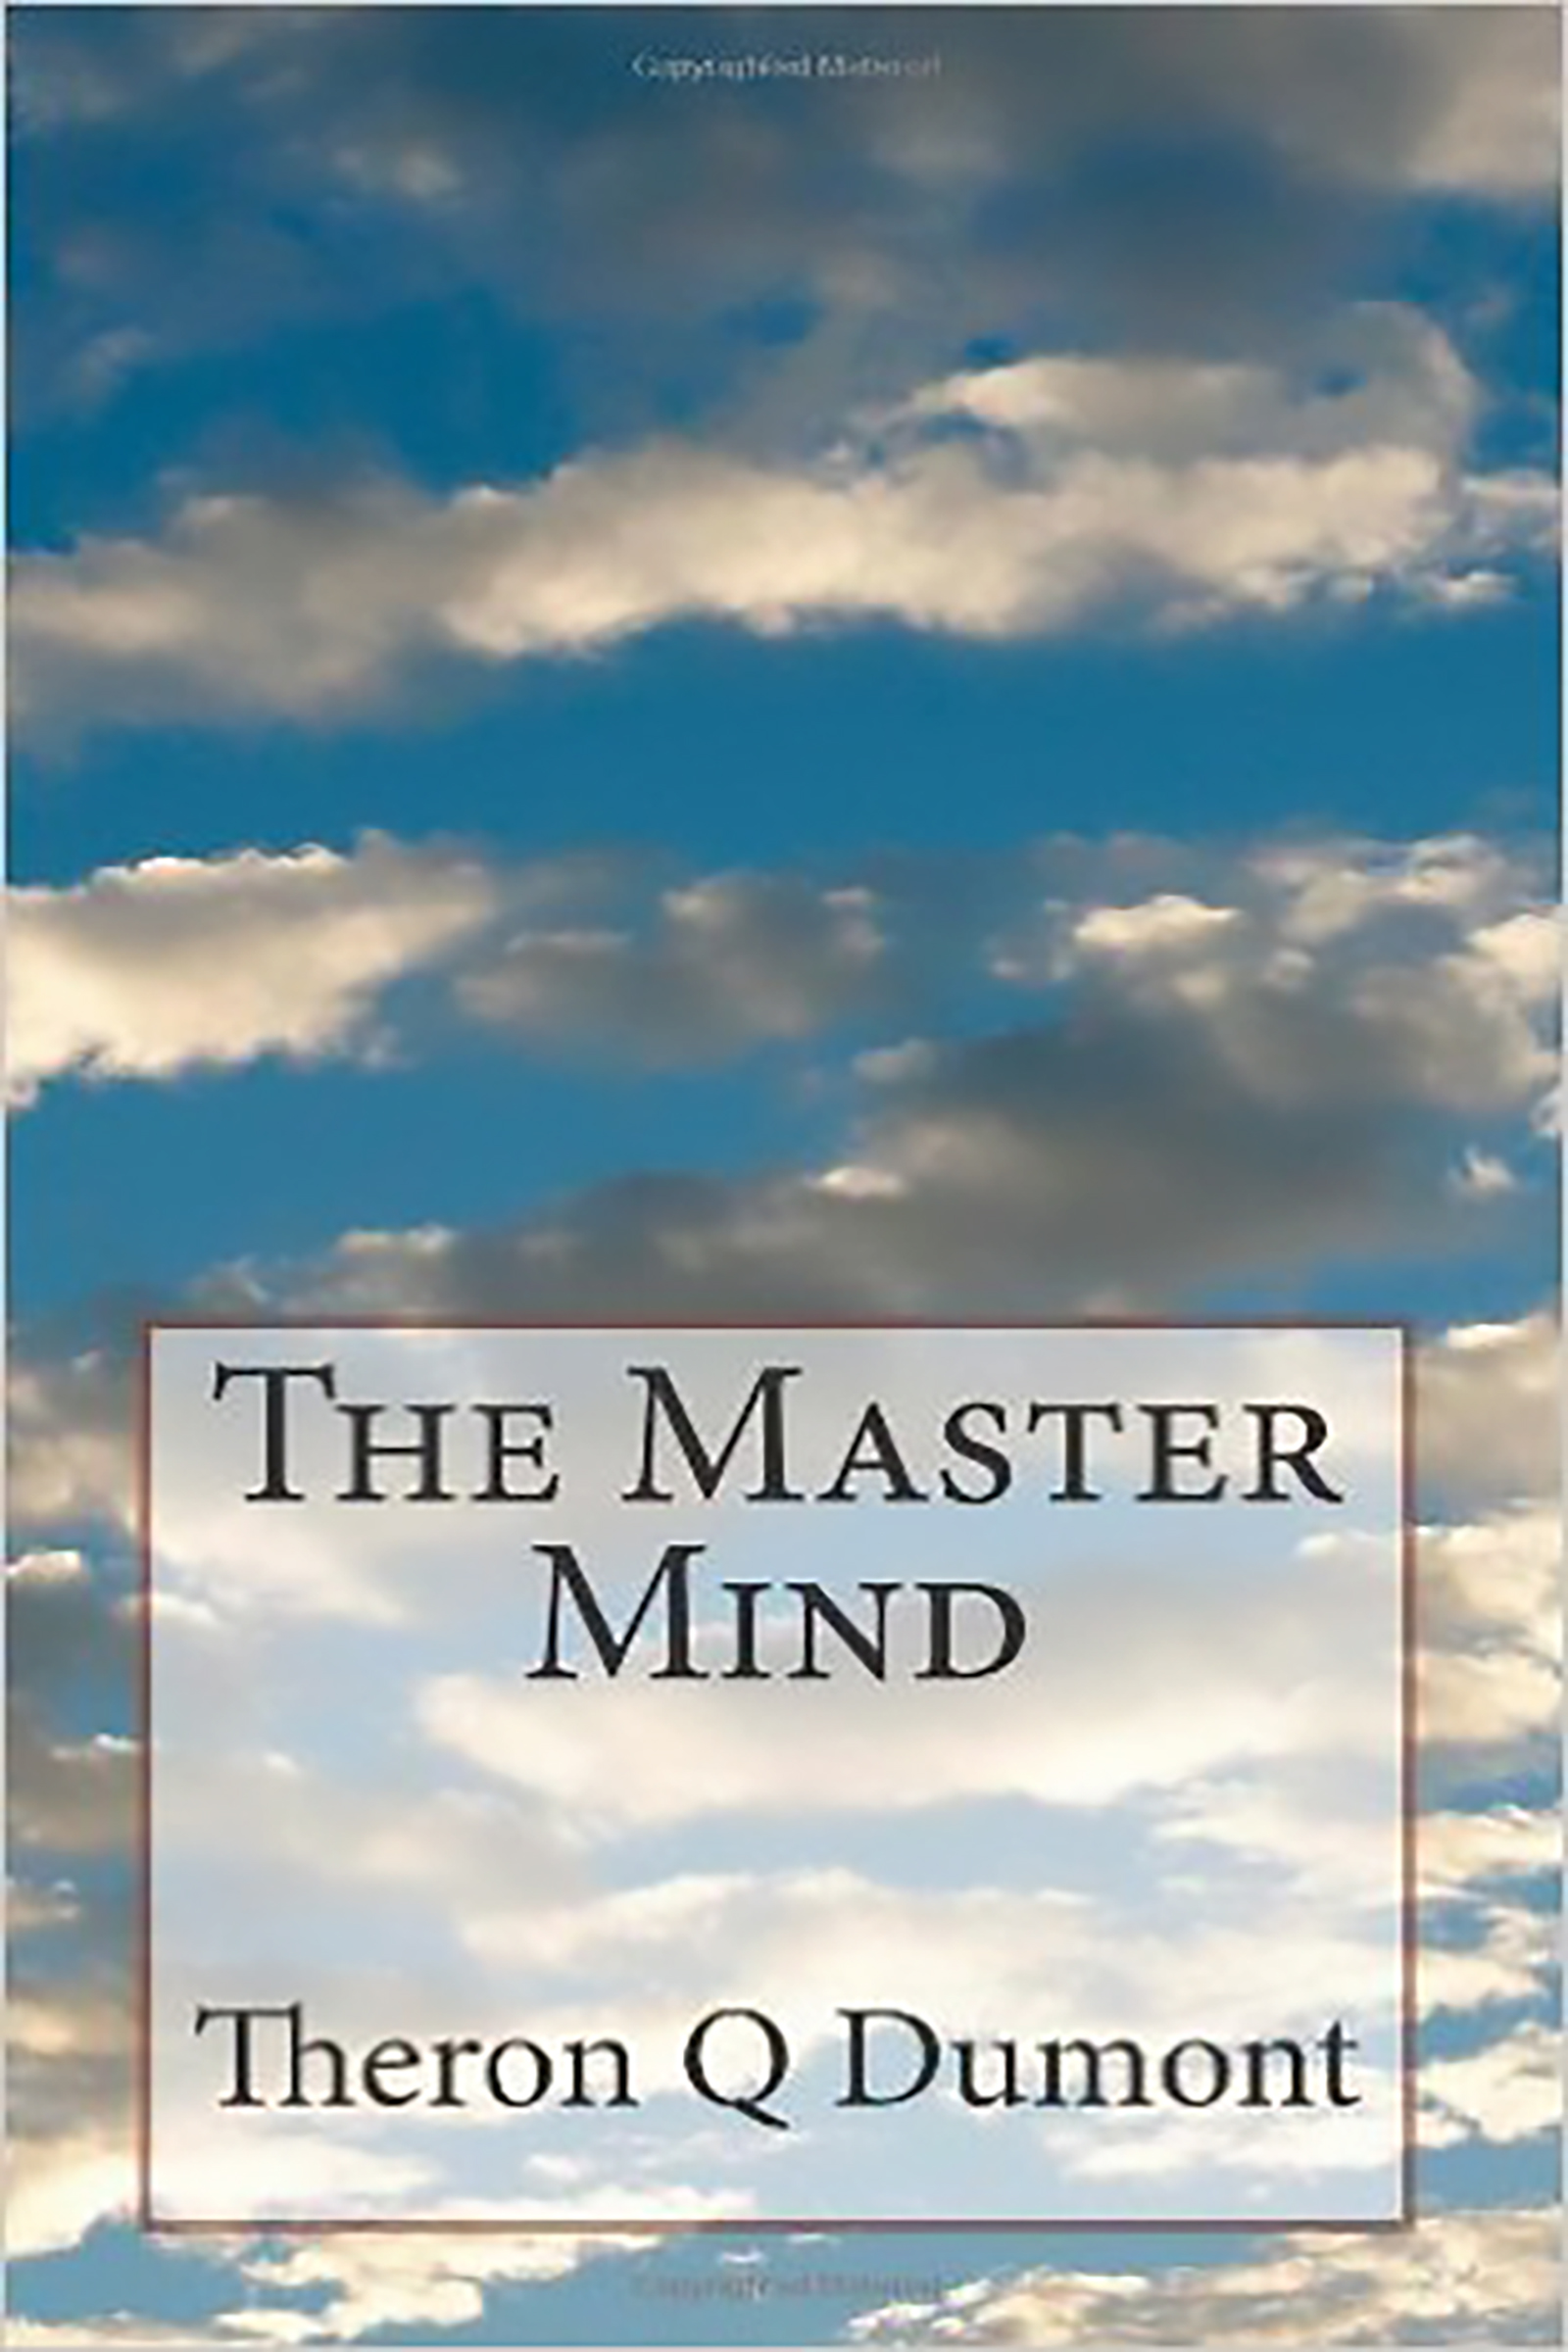 The Master Mind - by Theron Q Dumont